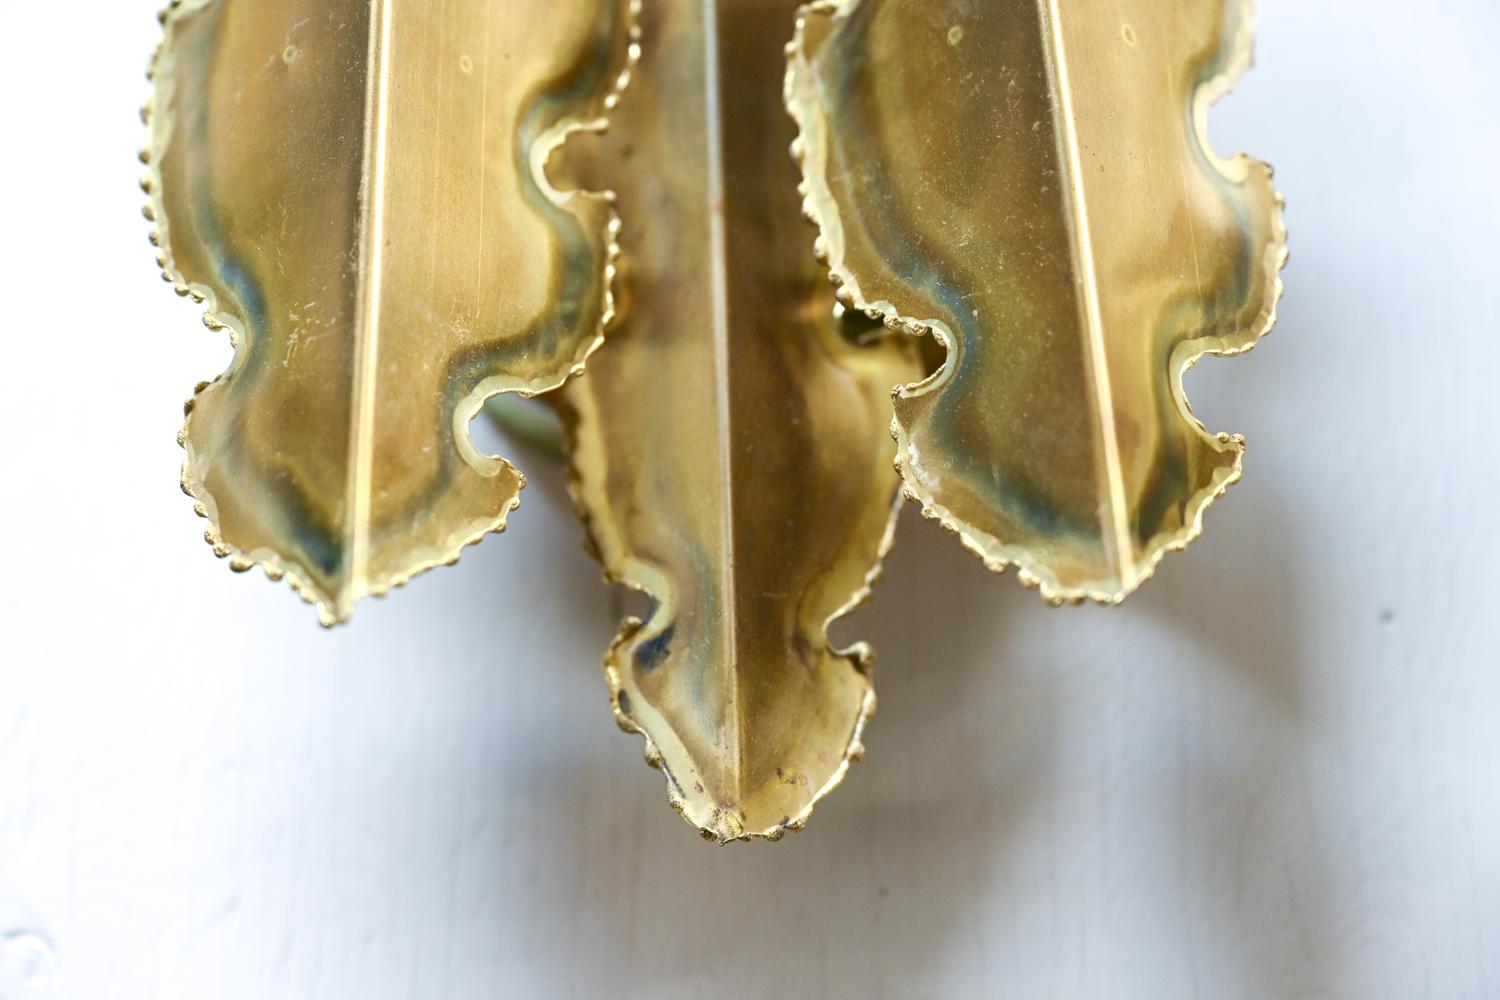 Danish Pair of Brutalist Torch-Cut Brass Wall Sconces by Holm Sørensen, c. 1960's